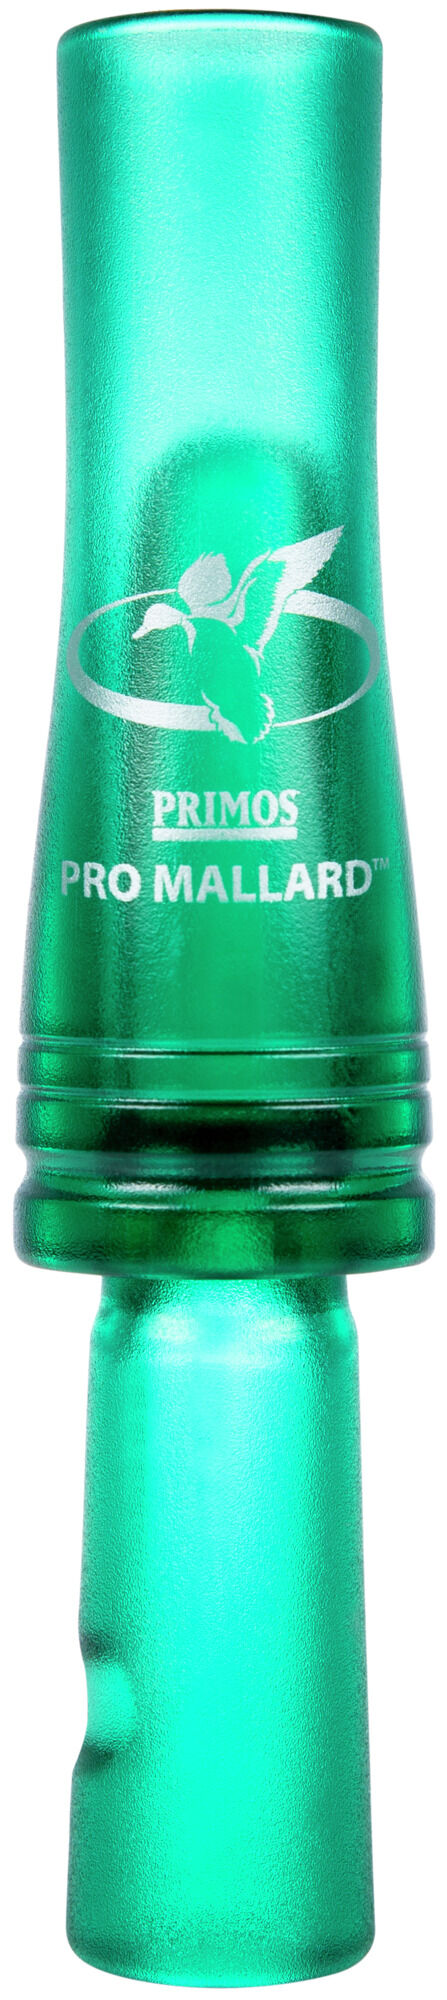 NEW Primos 804 Pro Mallard Duck Call Sngl-Reed Easy-To-Blow 